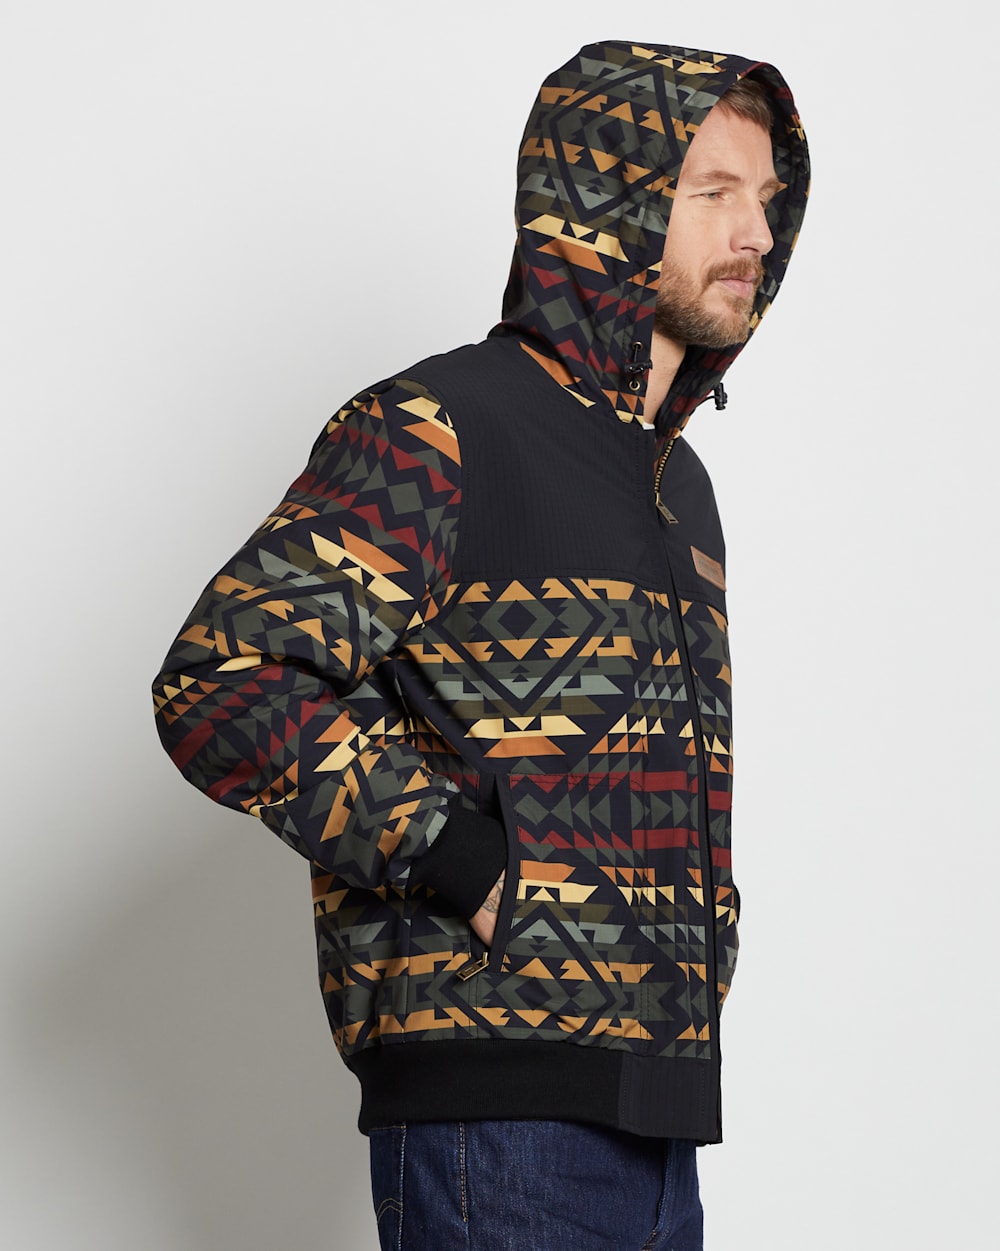 ALTERNATE VIEW OF MEN'S BOW PASS HOODED JACKET IN BLACK SMITH ROCK image number 3